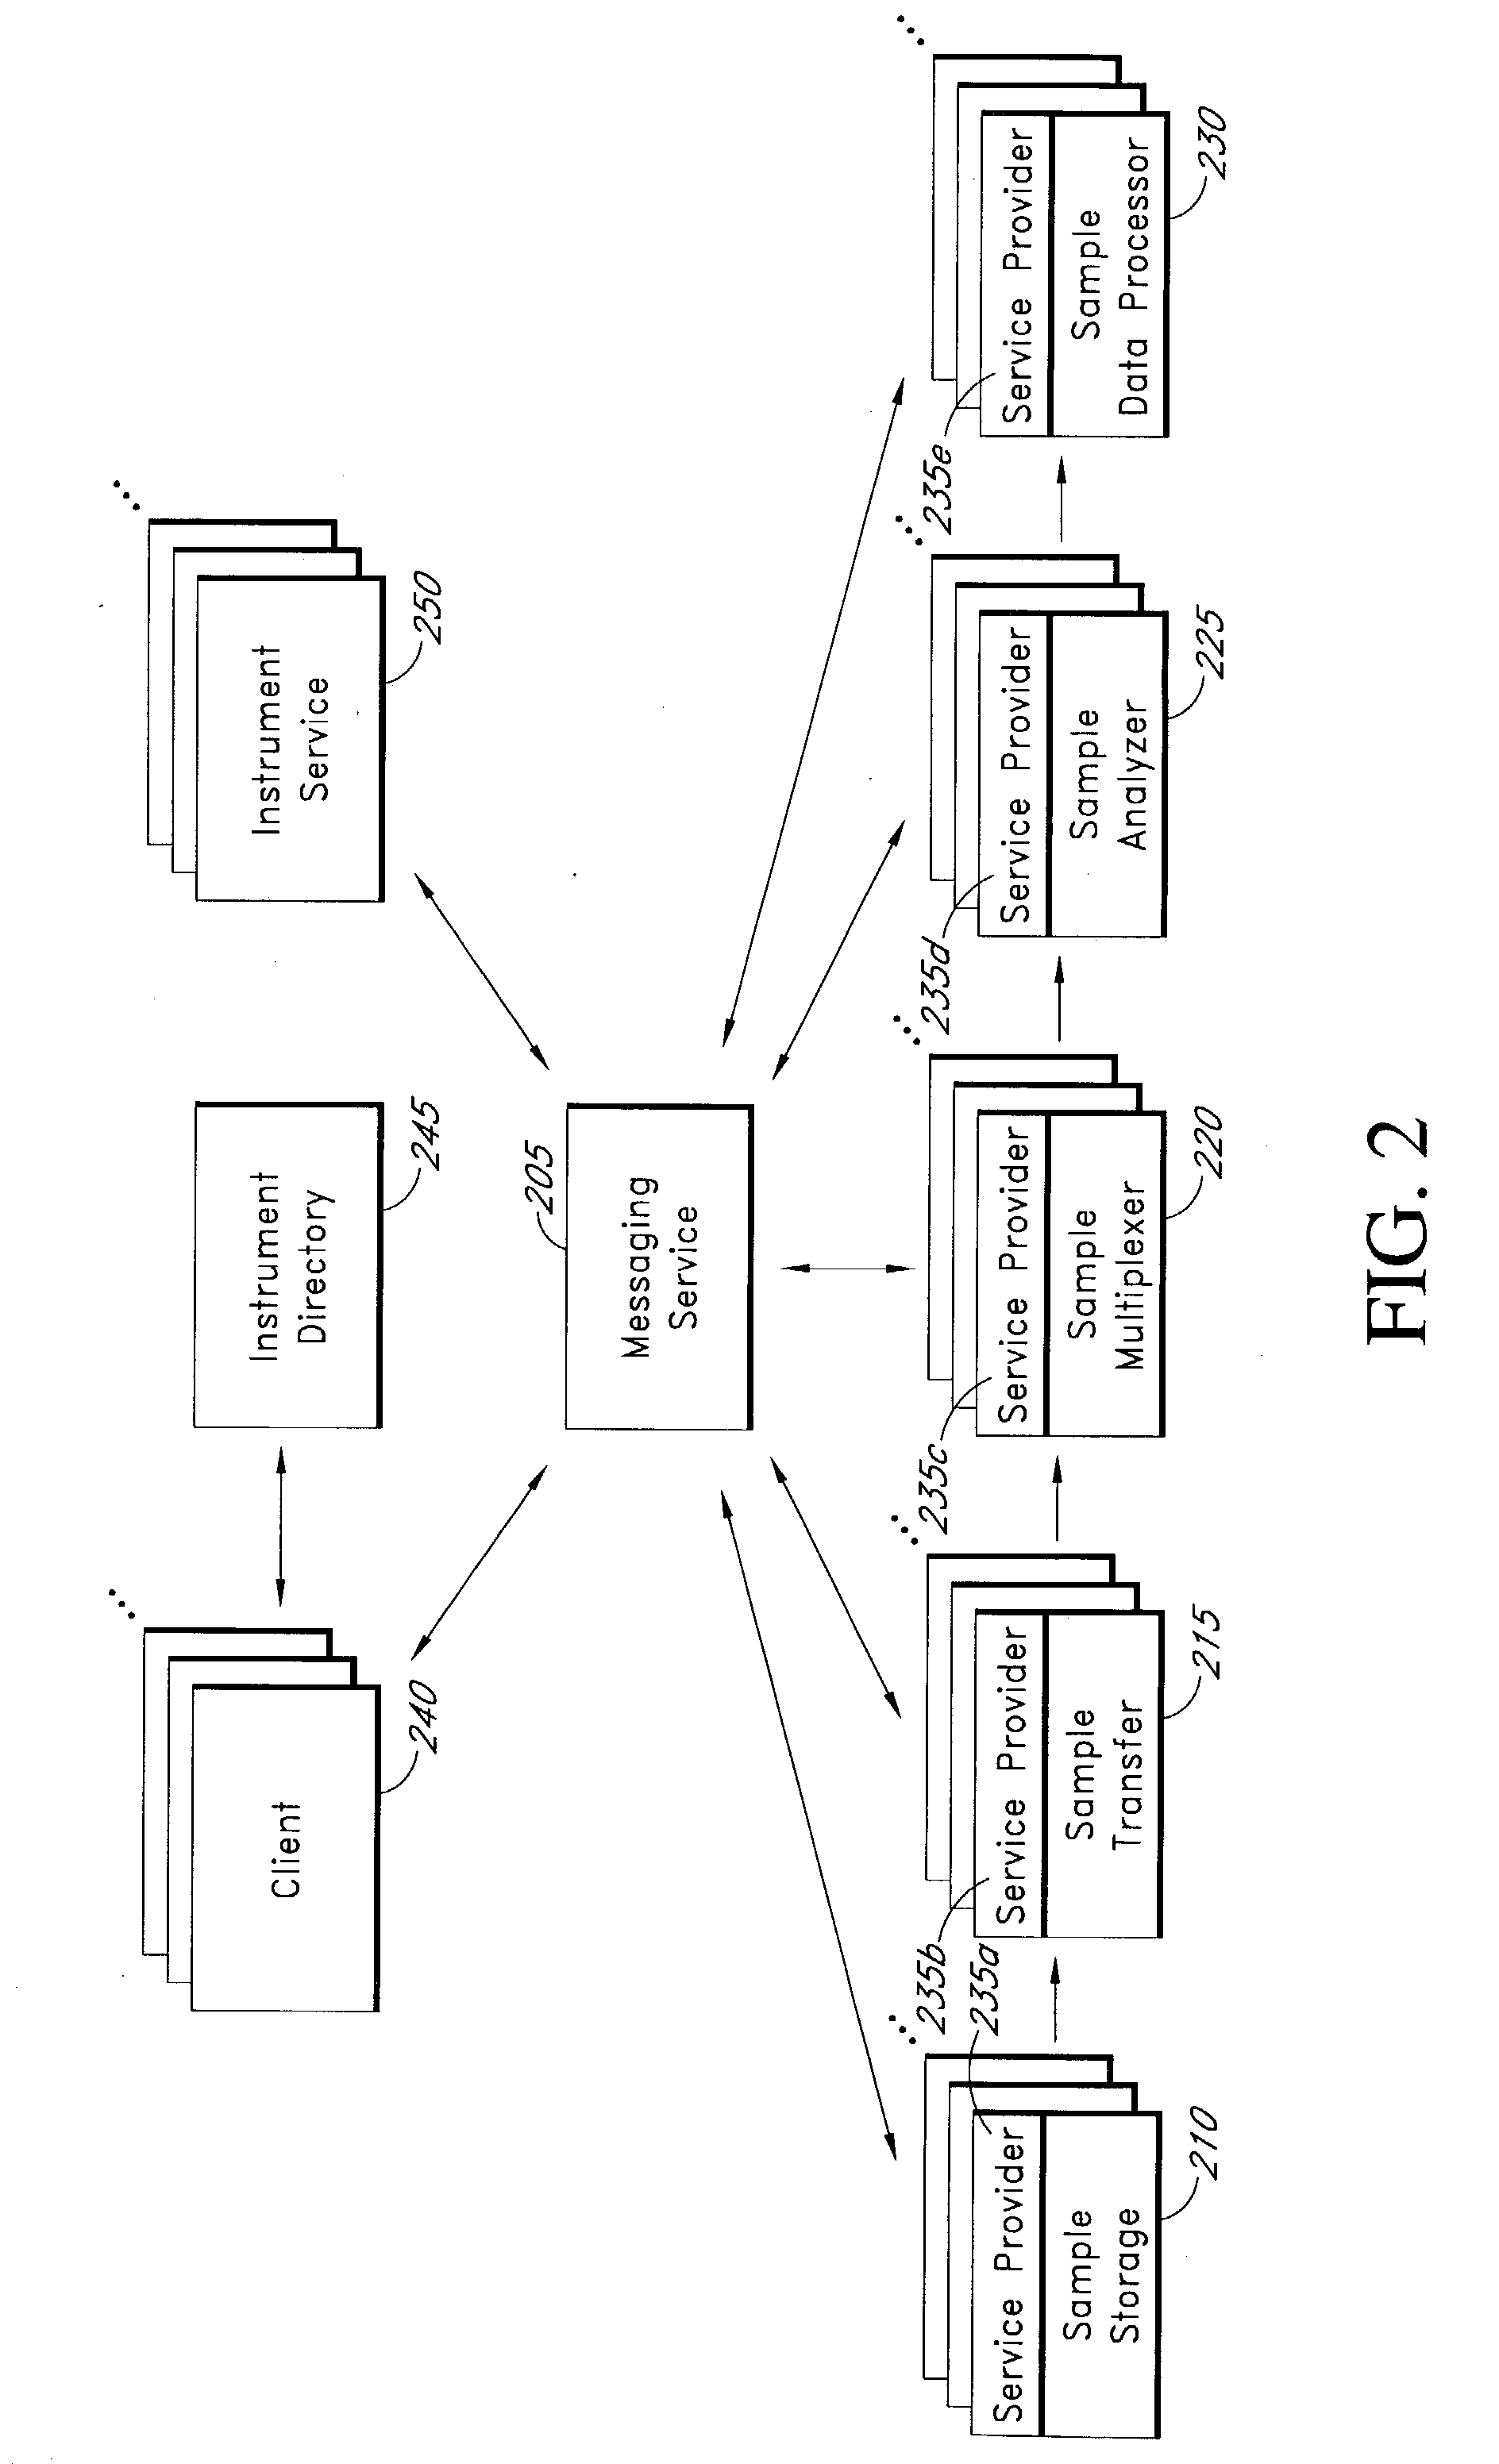 System and method for discovery of biological instruments